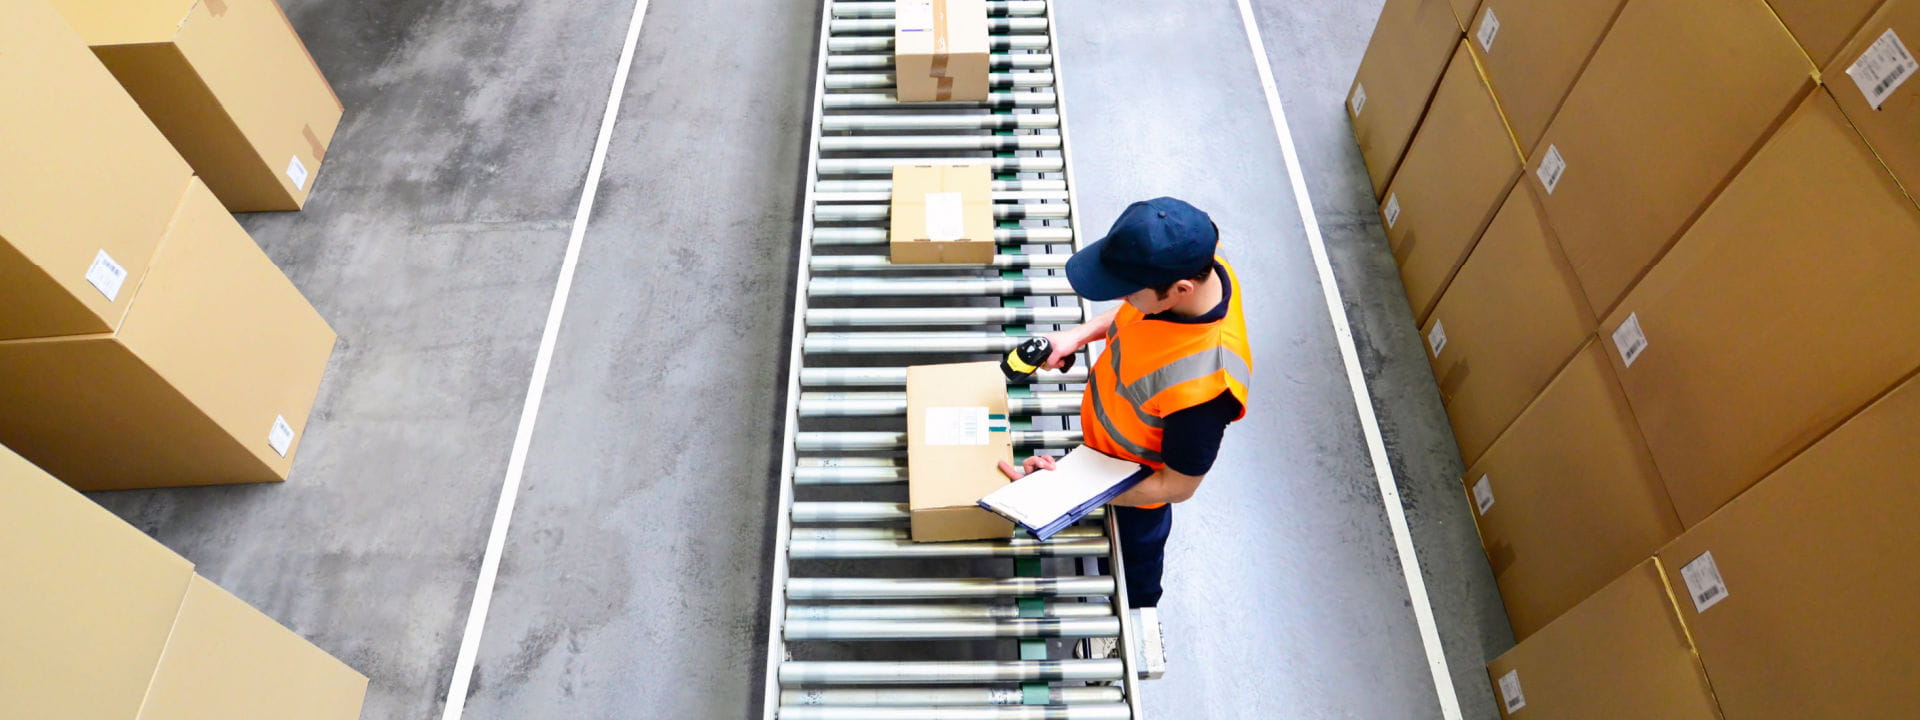 A warehouse worker placing labels on packages on a conveyor belt with stock piled up around.